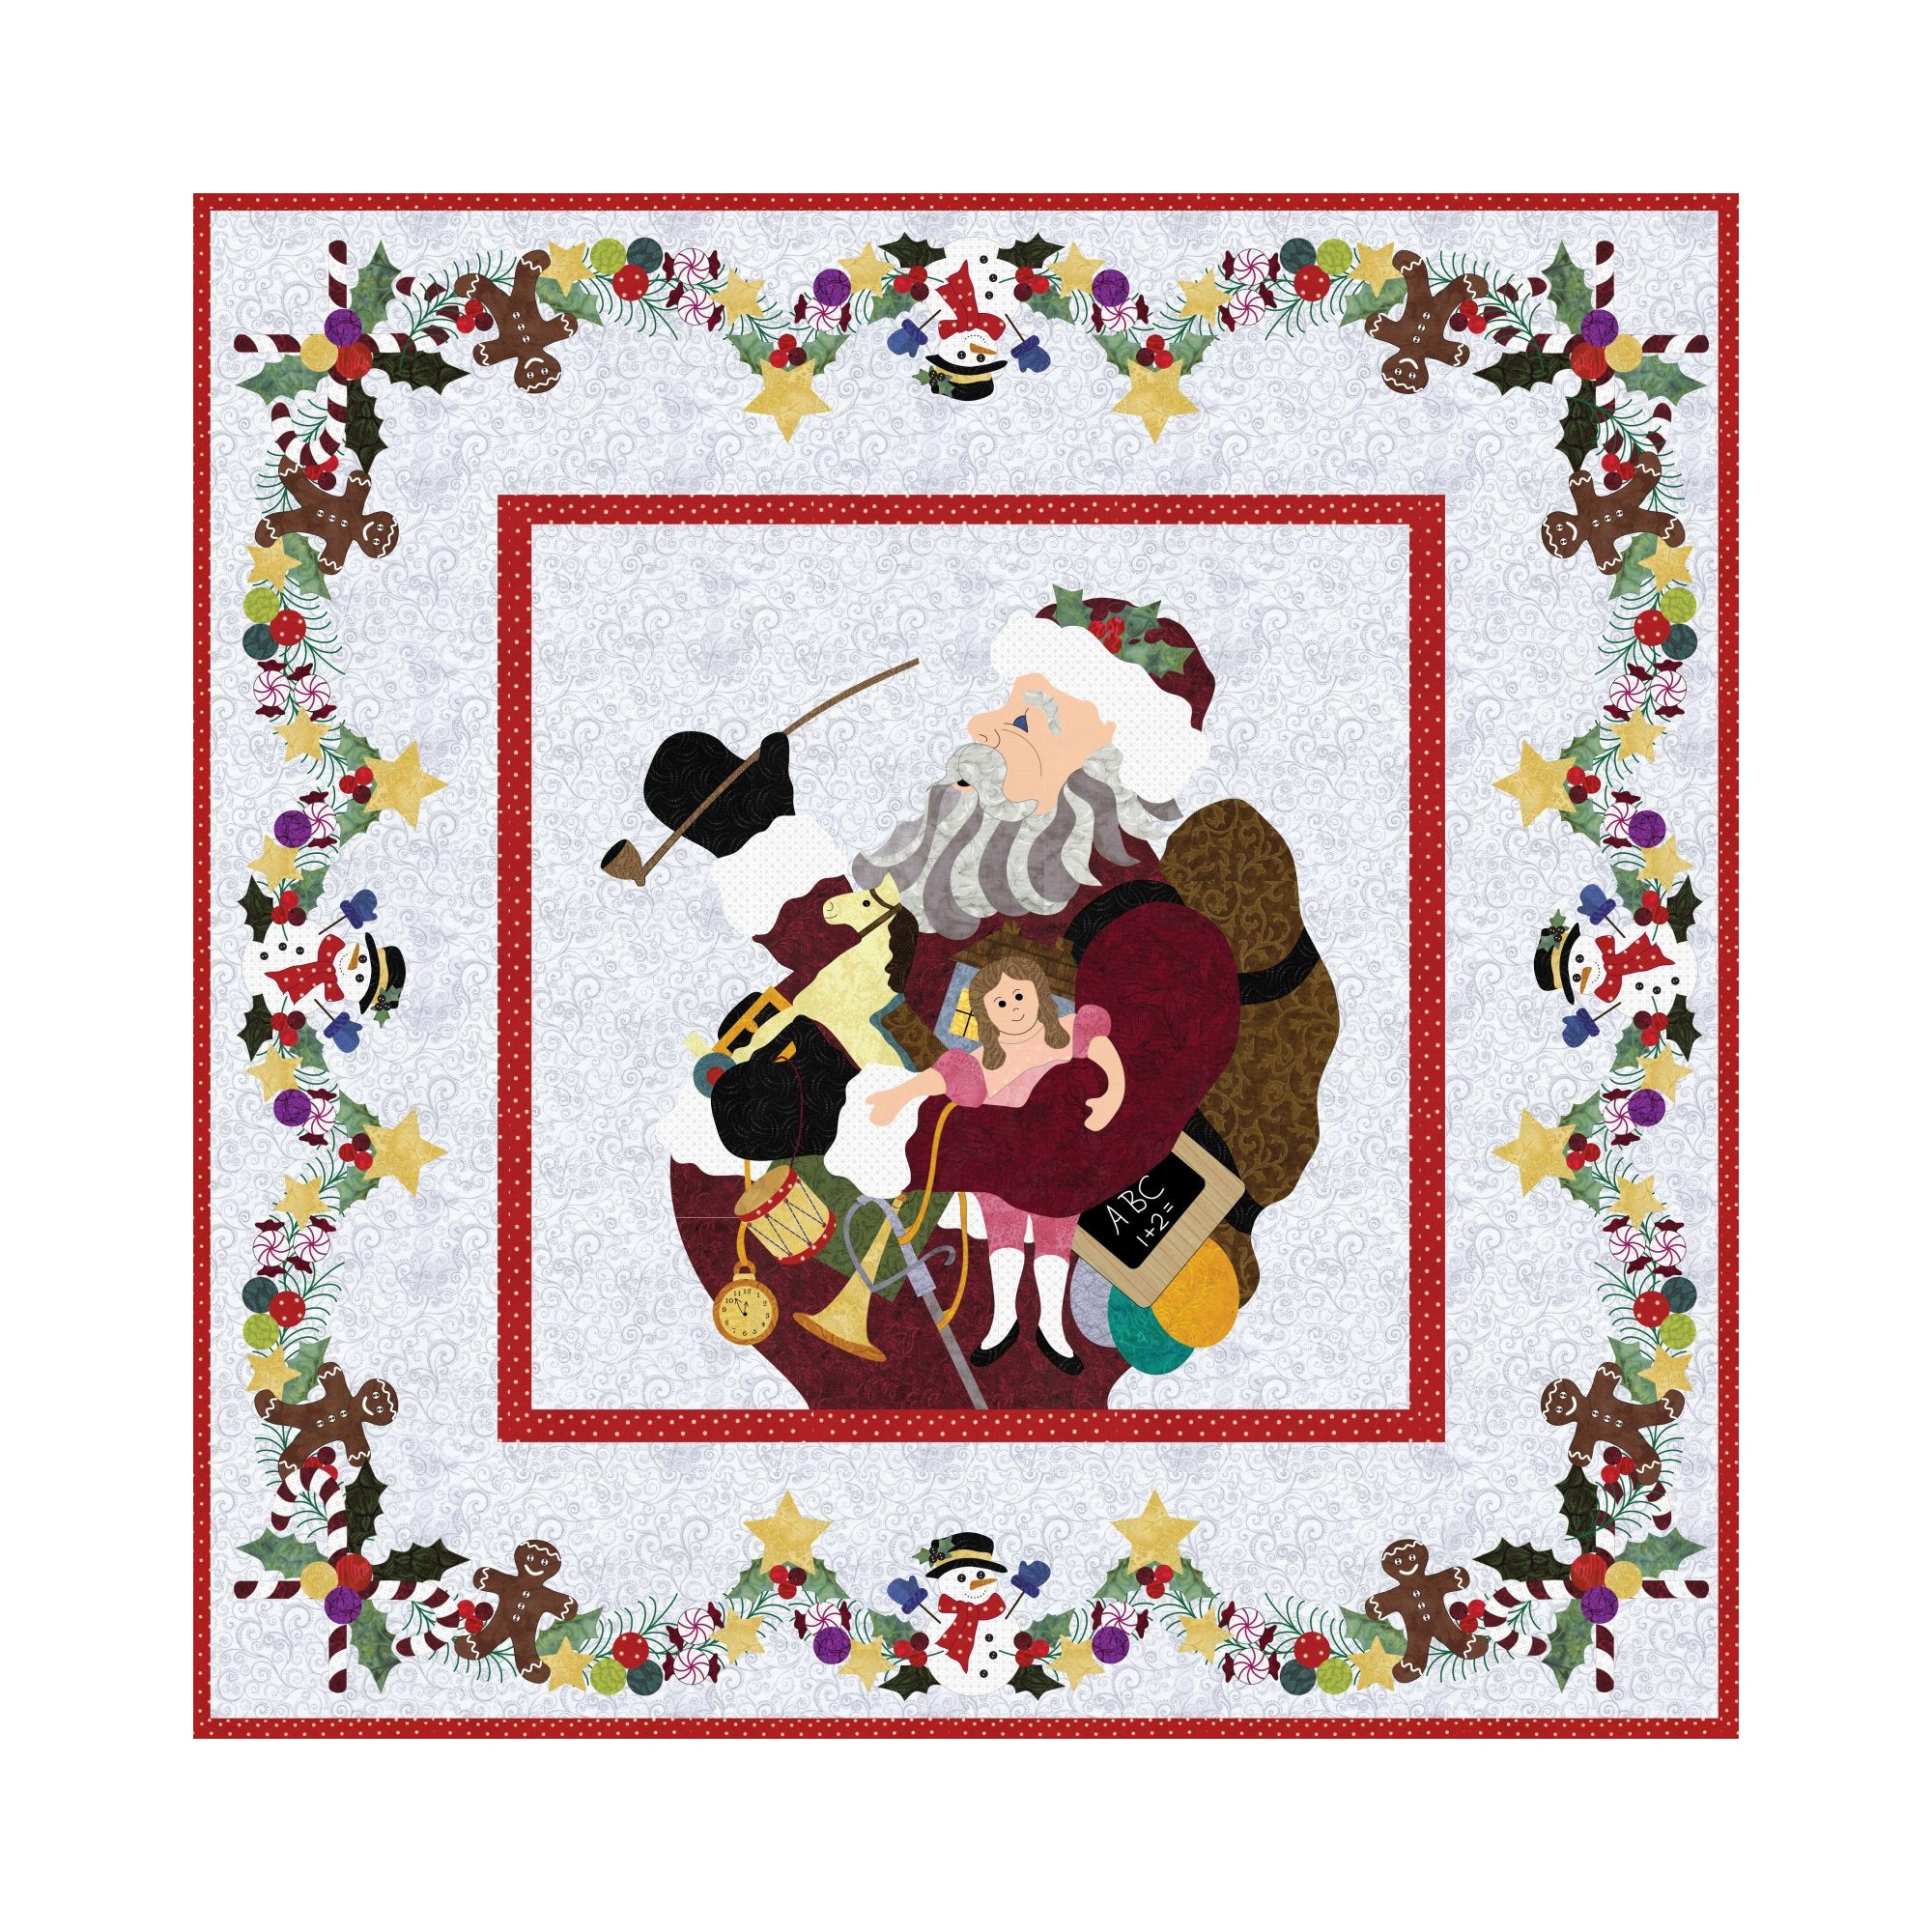 P3 Designs Ole Time Santa Christmas Holiday Applique Quilt Pattern